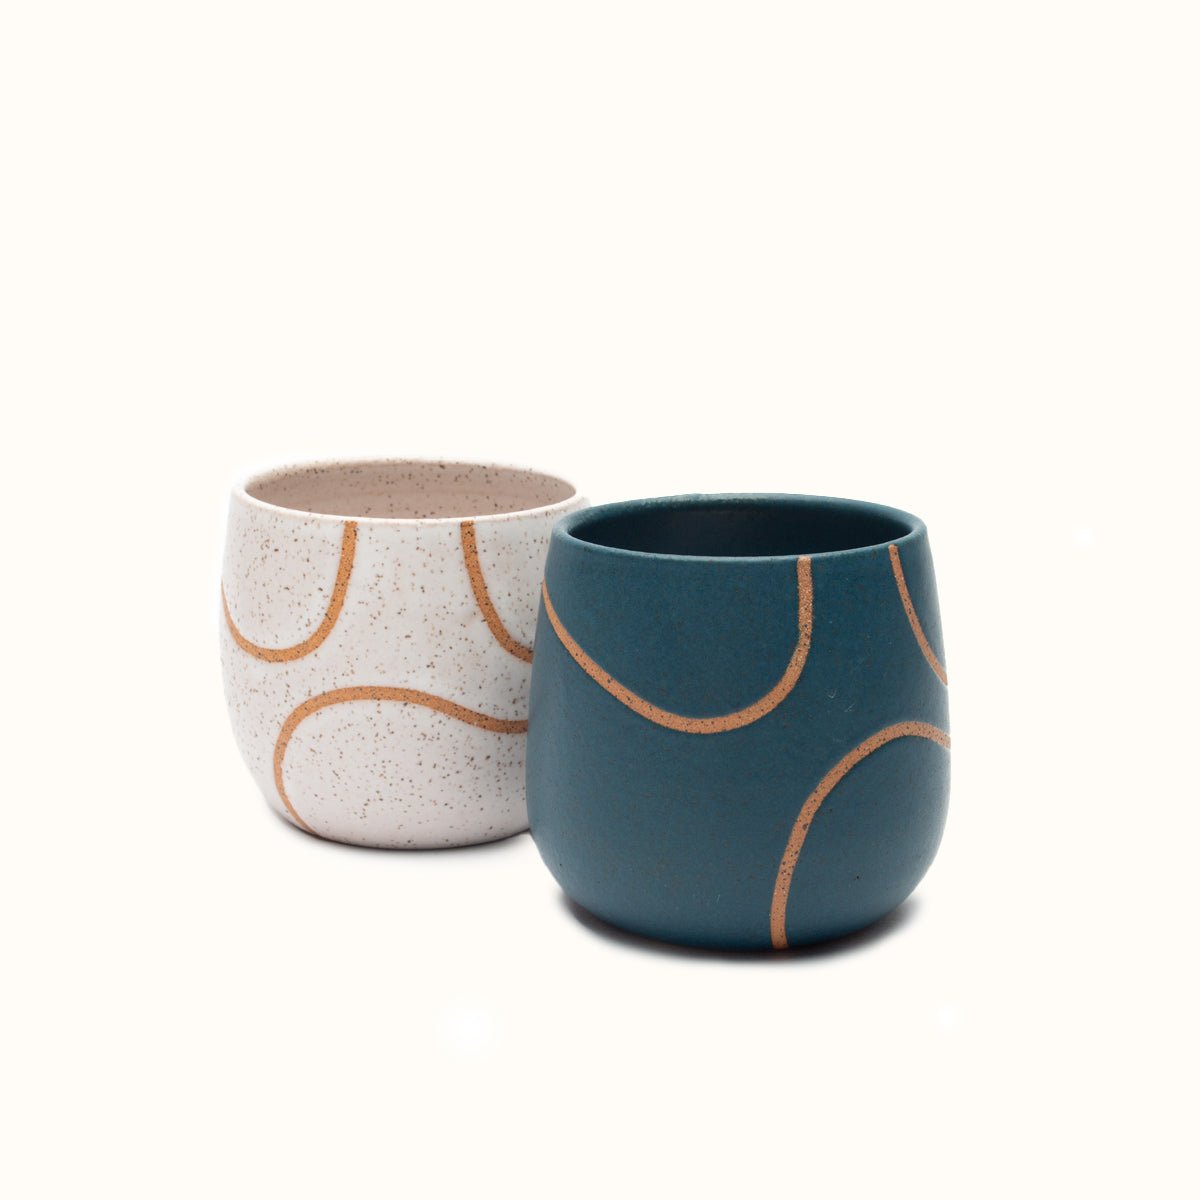 Handless mugs in a matte finish with a single squiggle design in raw speckled clay. From left to right: White, Blue. The Tea Cup with Single Squiggle in White and Blue is designed by Kohai Ceramics and handmade in Portland, OR.